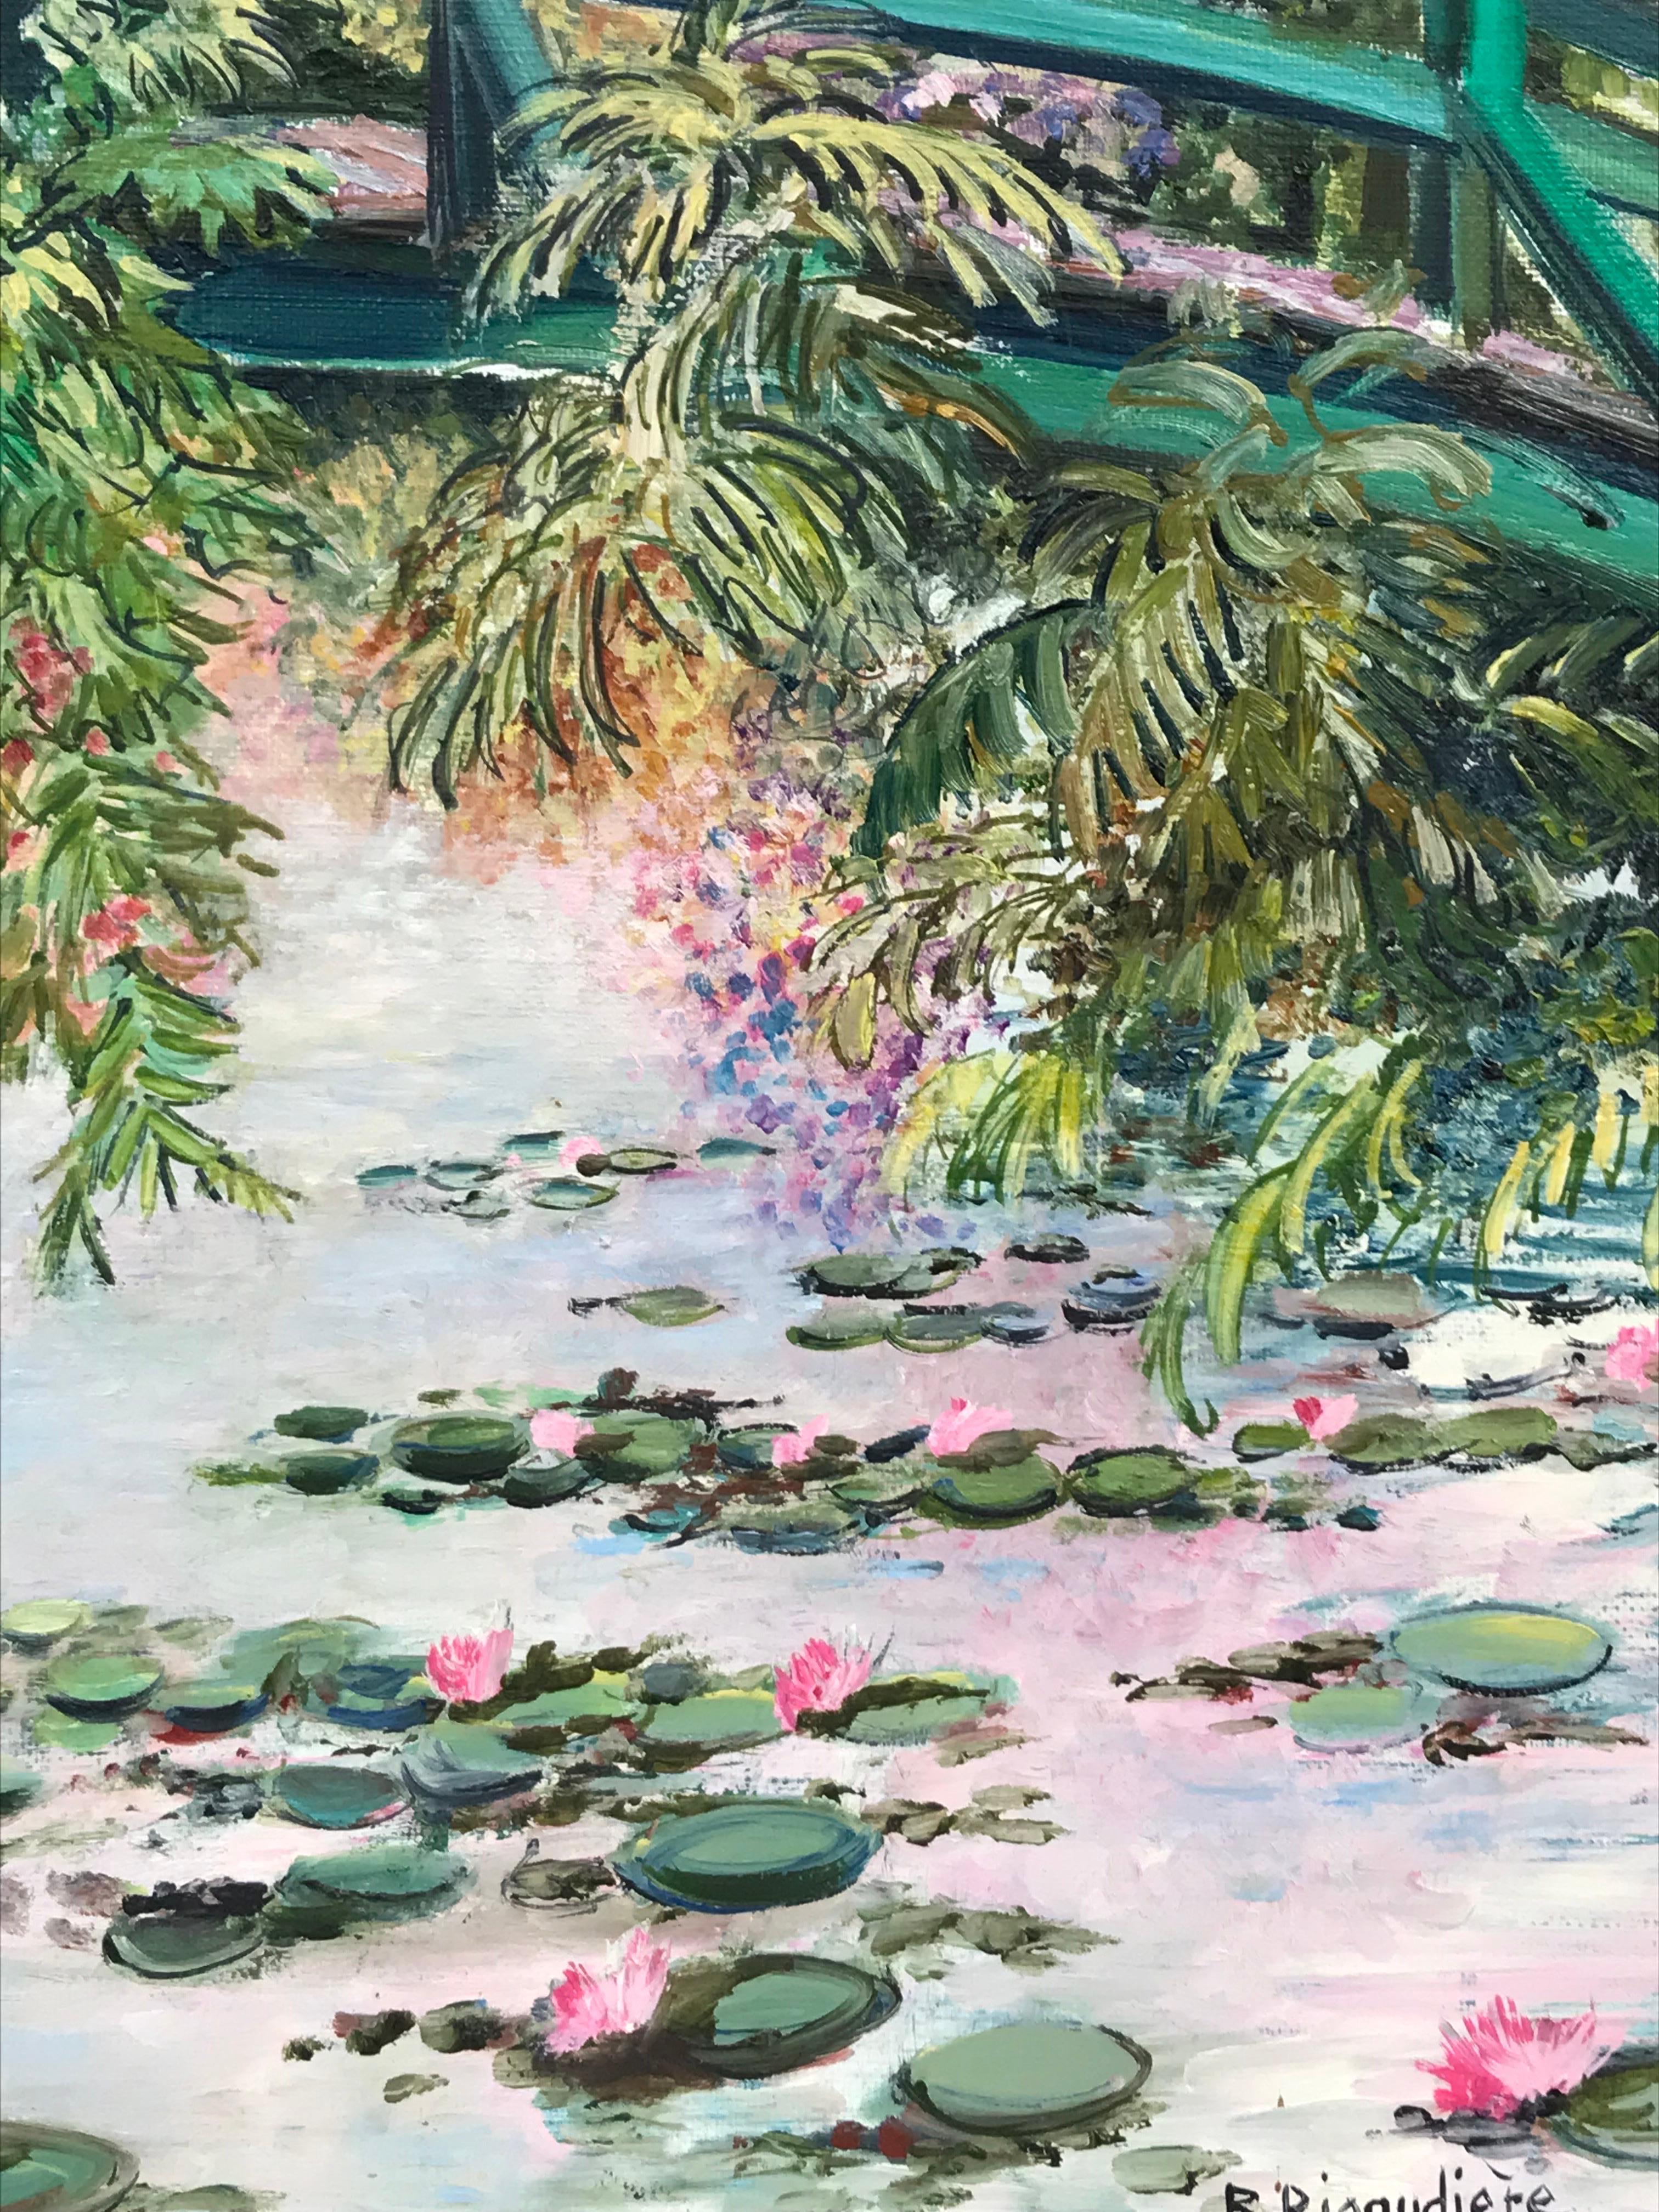 Artist/ School: B. Rigaudiere, signed front and back, French early 21st century

Title: The Japanese Bridge, Monet's Garden at Giverny overlooking the waterlily pond. 

Medium: oil painting on canvas, unframed and inscribed verso

canvas : 18 x